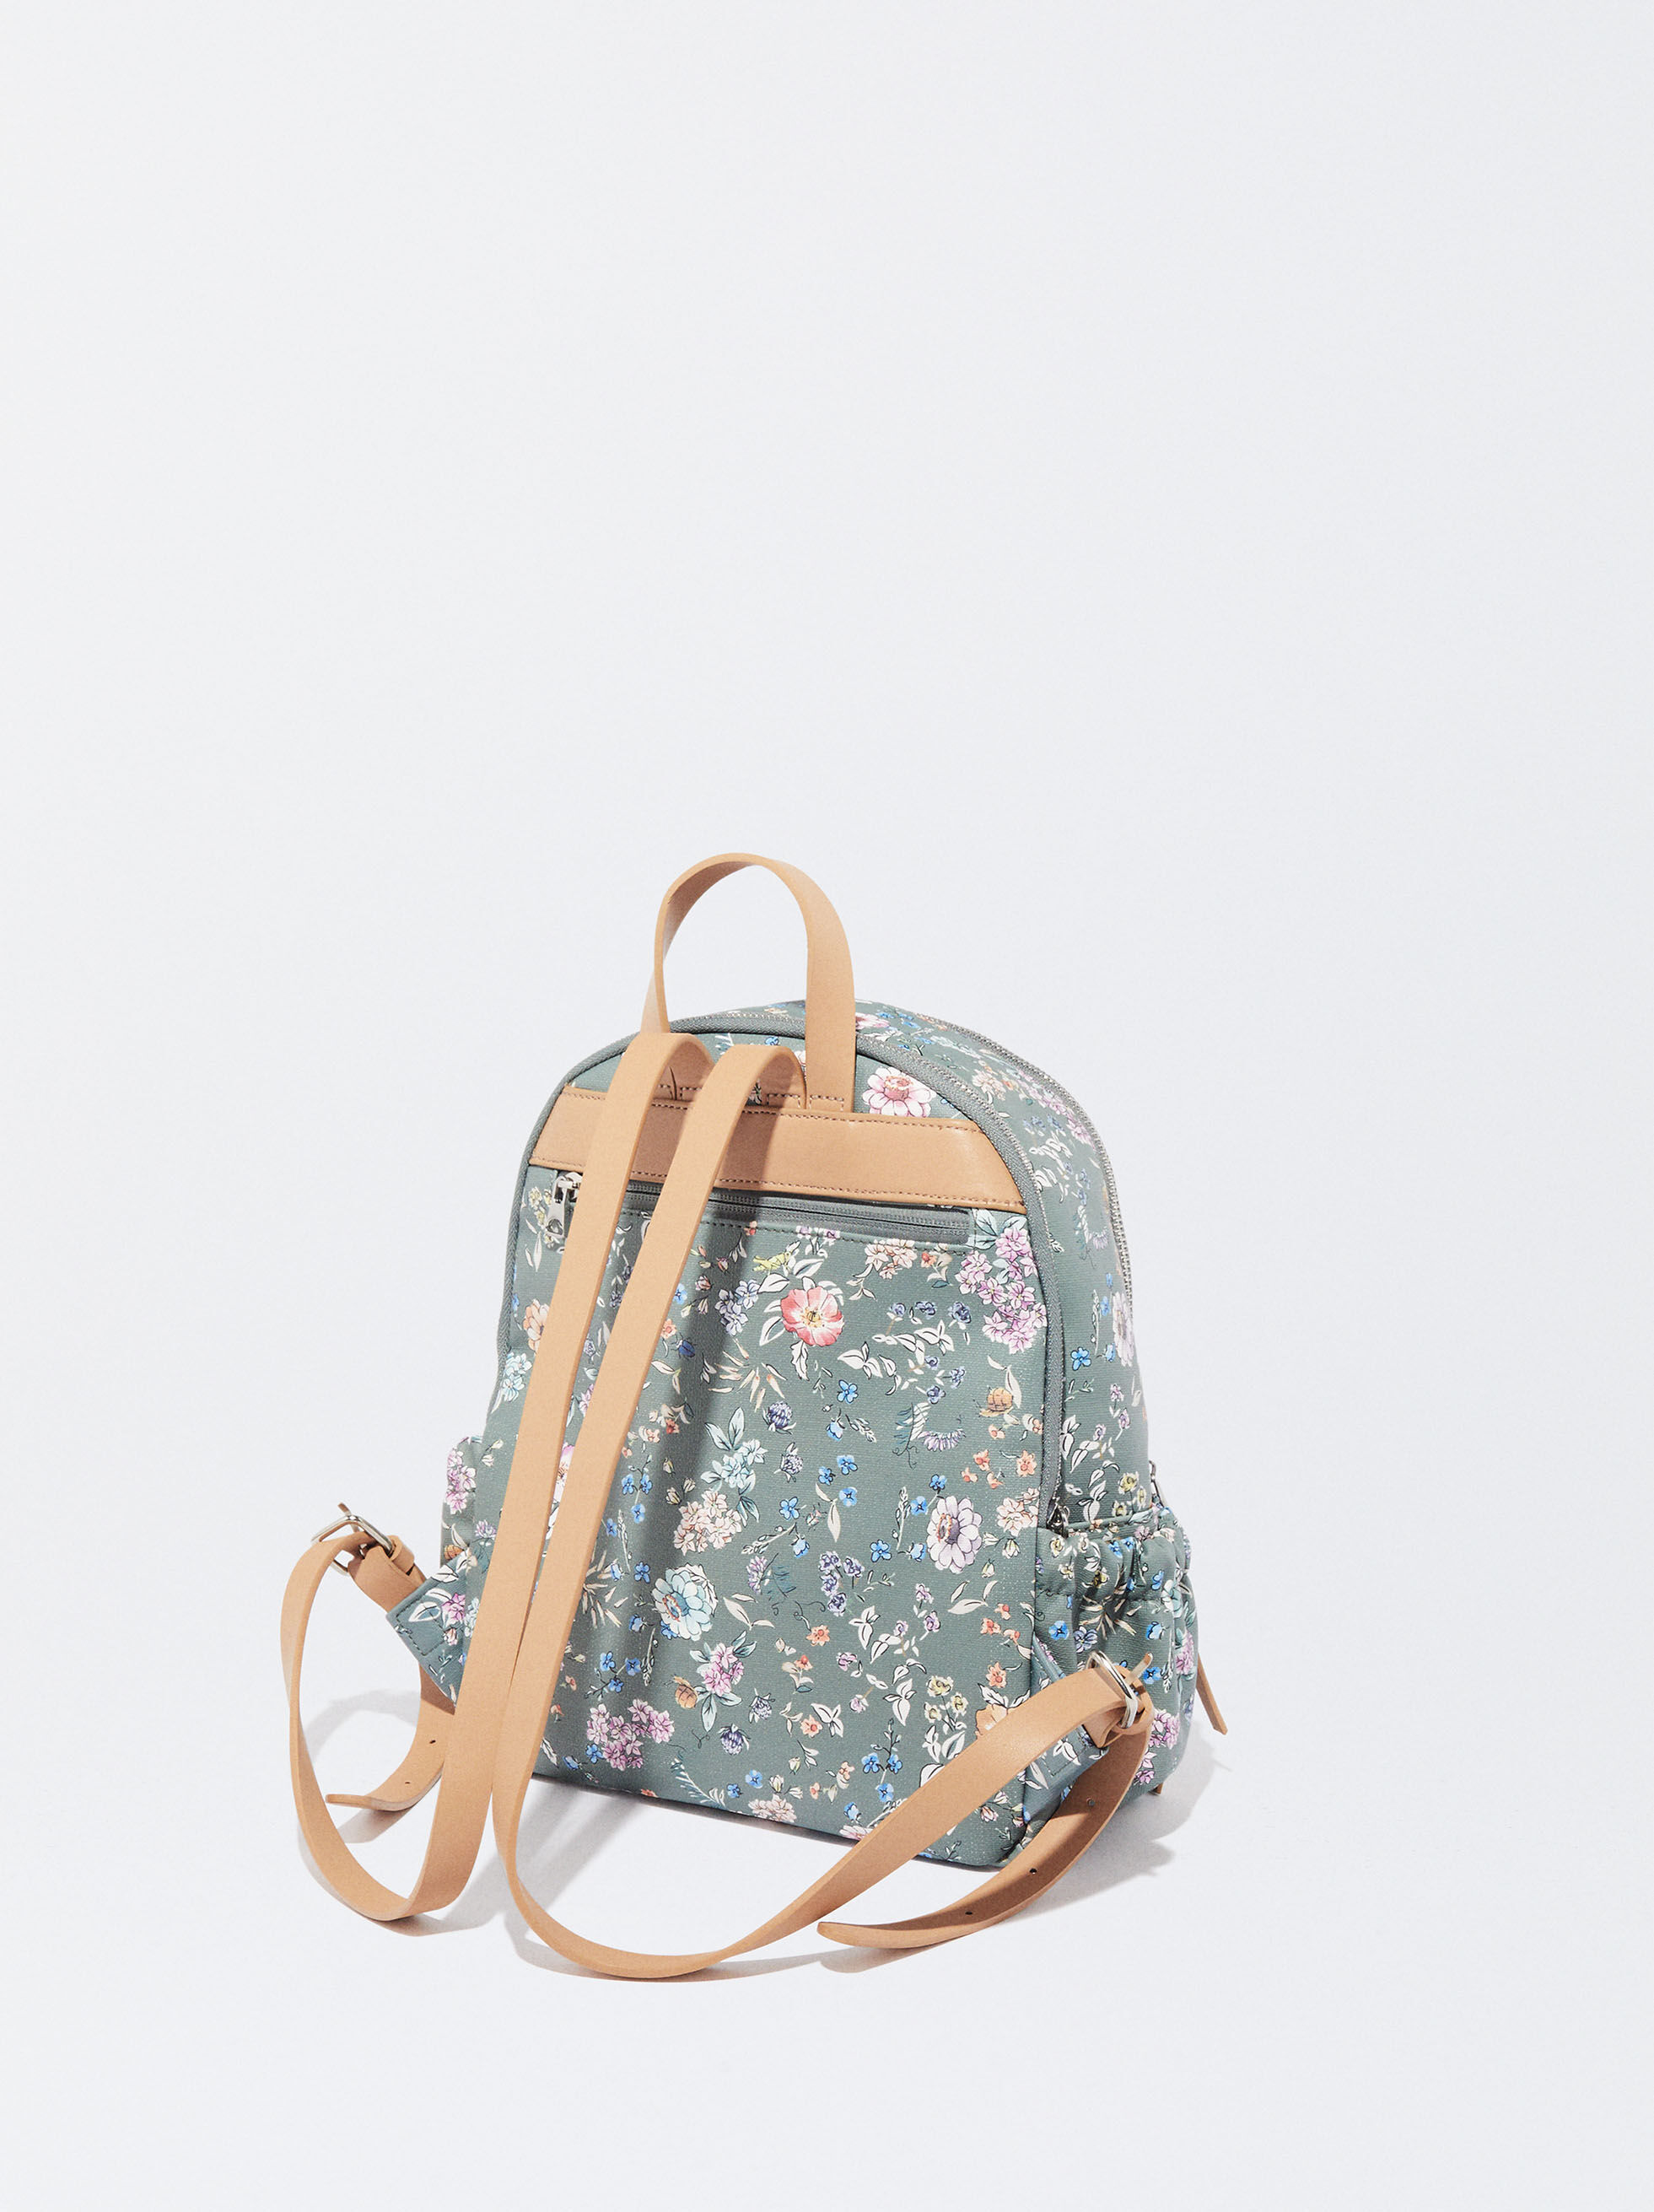 Floral Backpack · Available at Los Angeles International Airport (LAX)